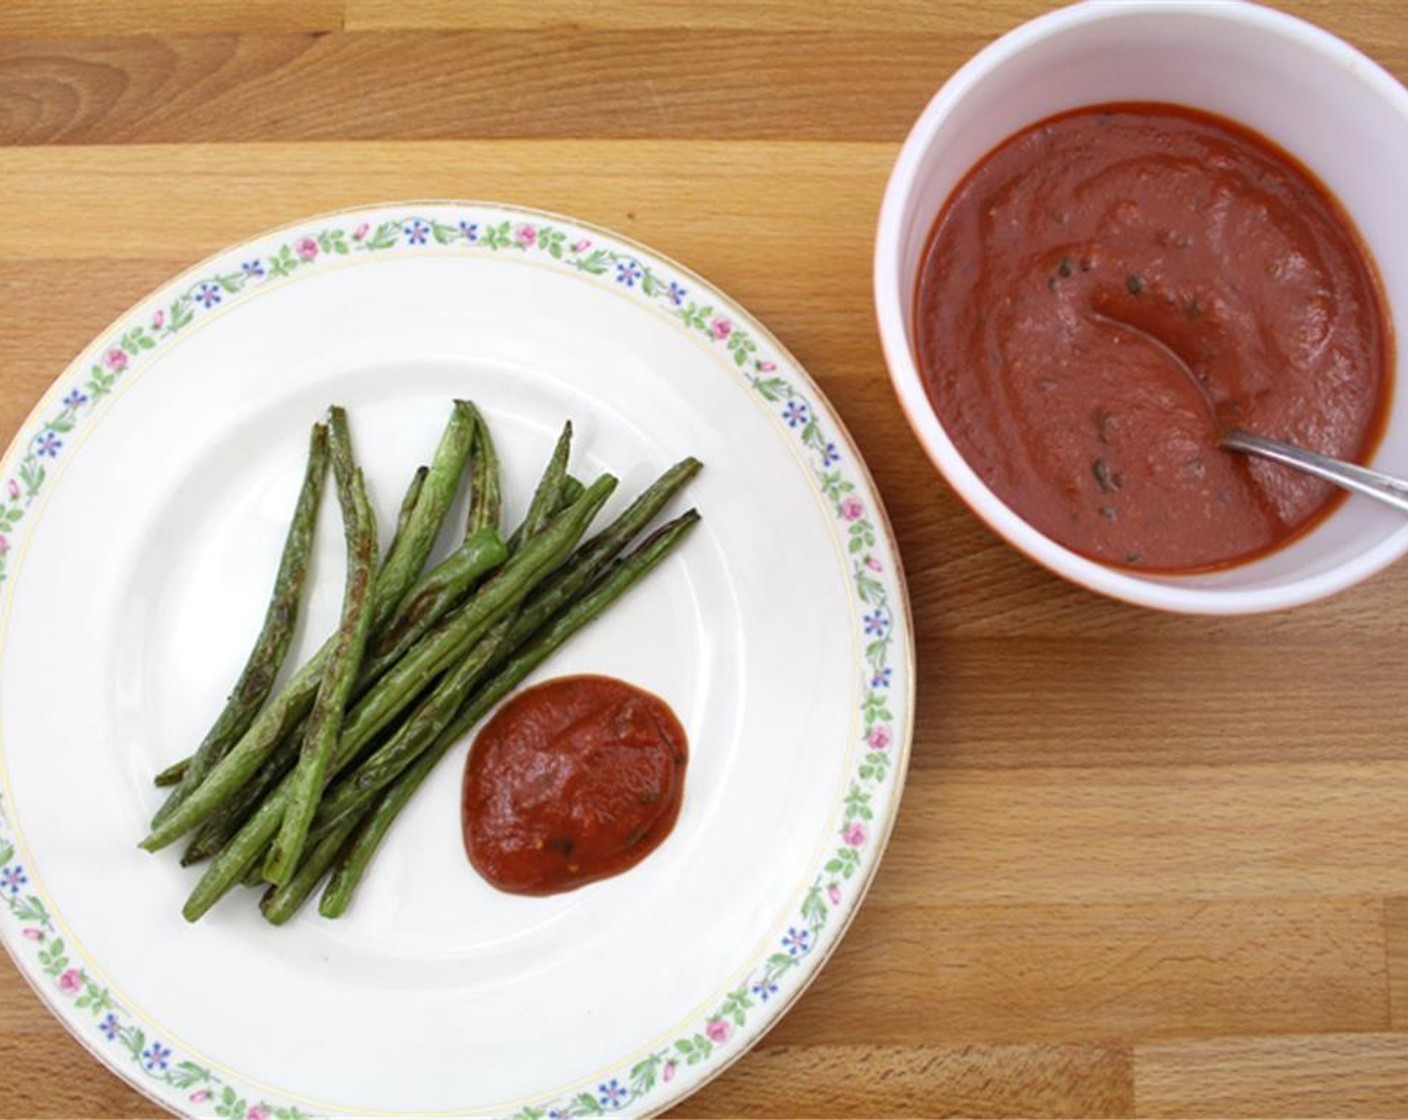 step 4 Serve green beans and dip in the "ketchup".